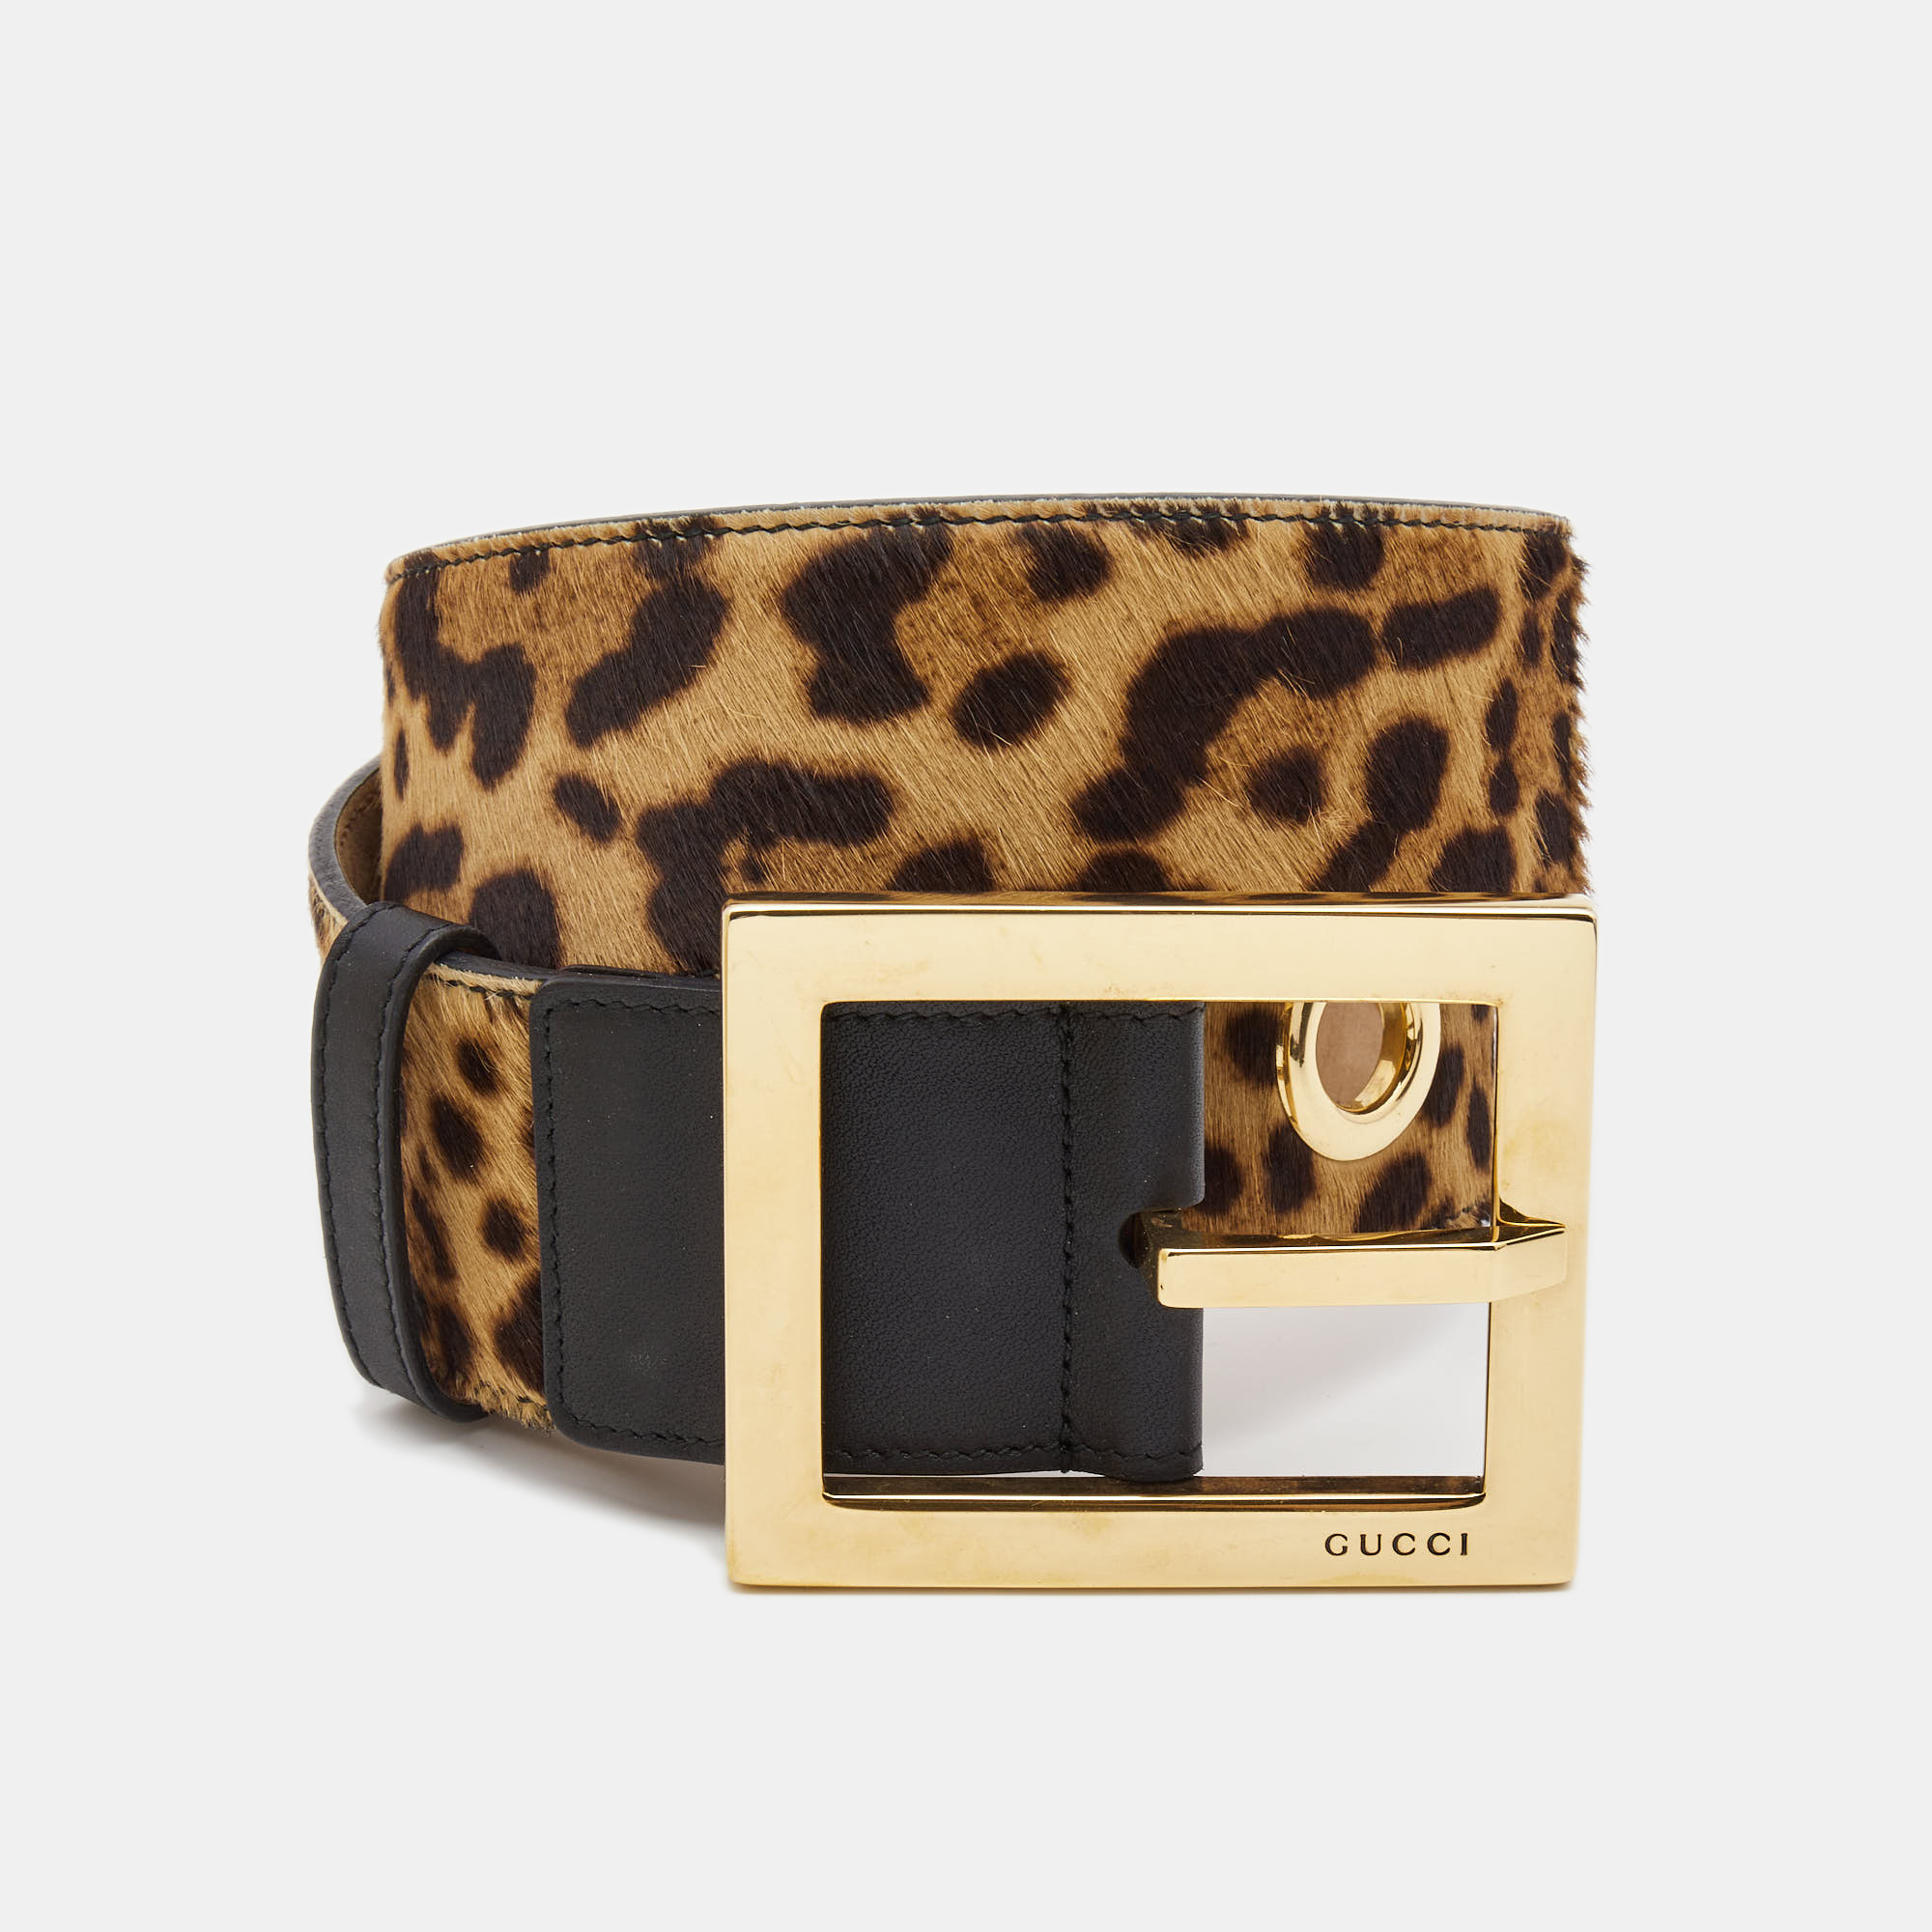 Gucci Beige/Black Leopard Print Calfhair And Leather Wide Buckle Belt 70CM